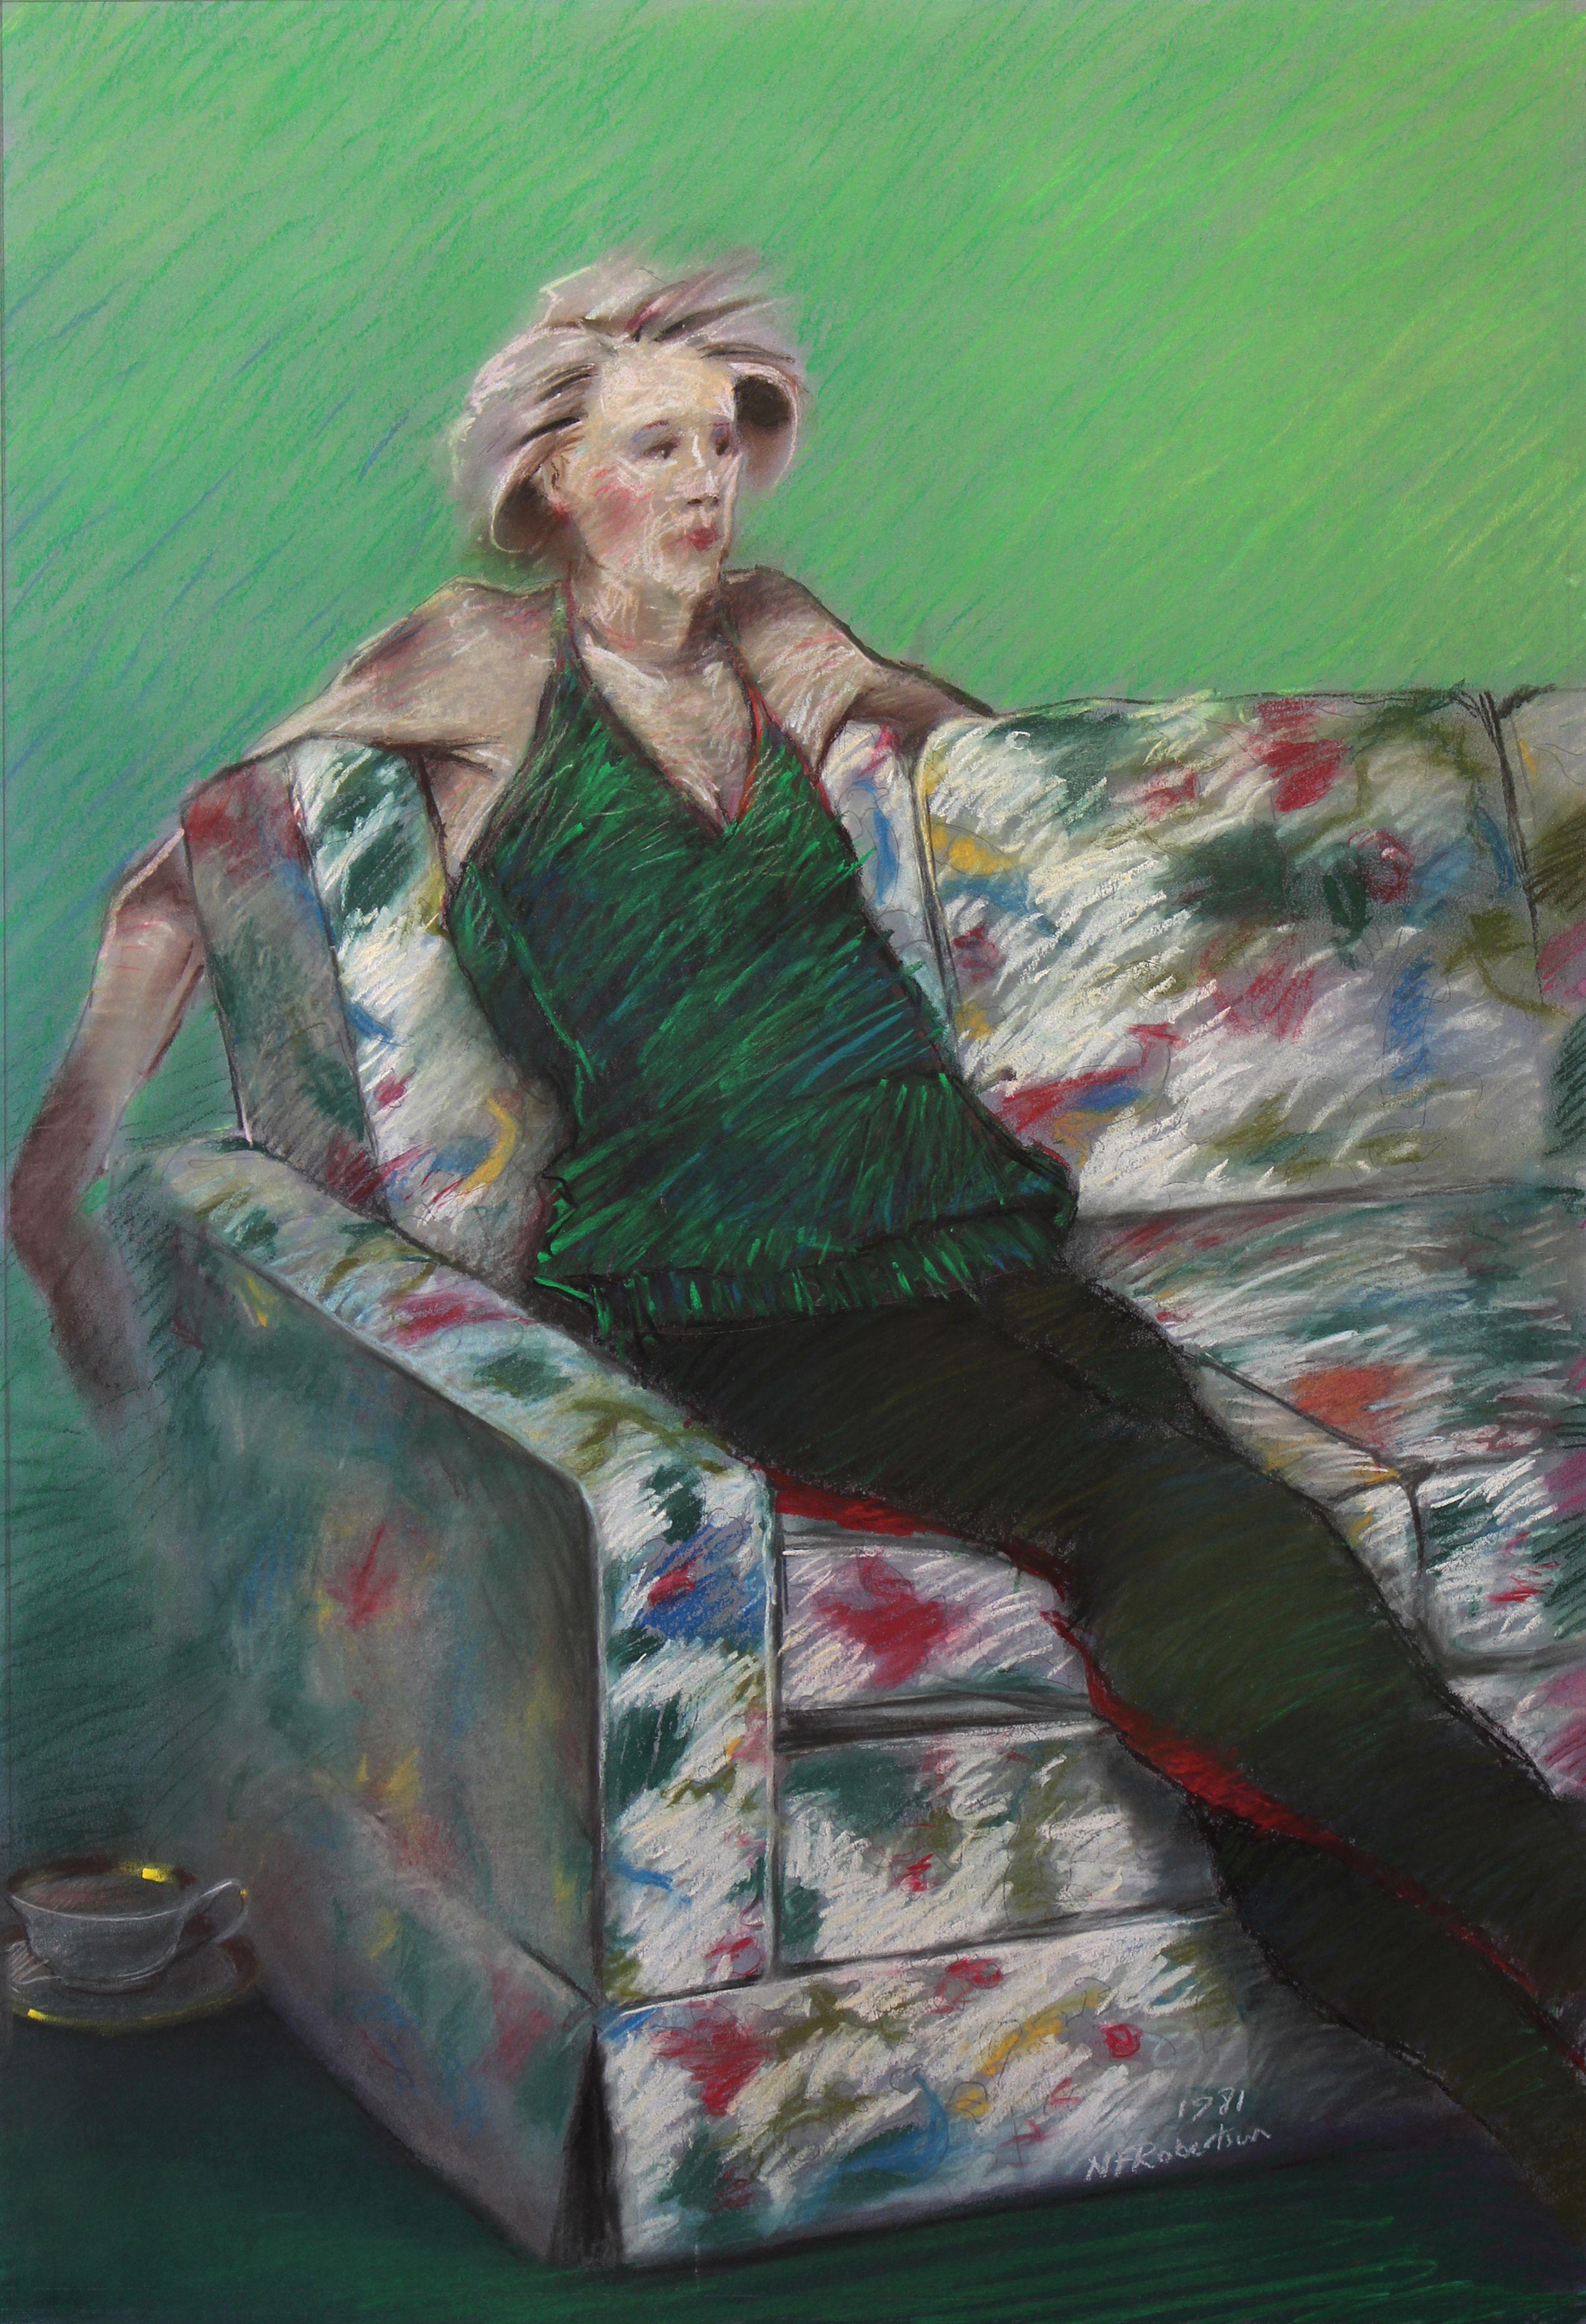 Woman watching TV with spent cup of tea/coffee.     I apply the pastel in successive layers to achieve a soft structure with some areas having a more robust textured element. I use artists hogs hair brushes to manipulate some of the work to give it